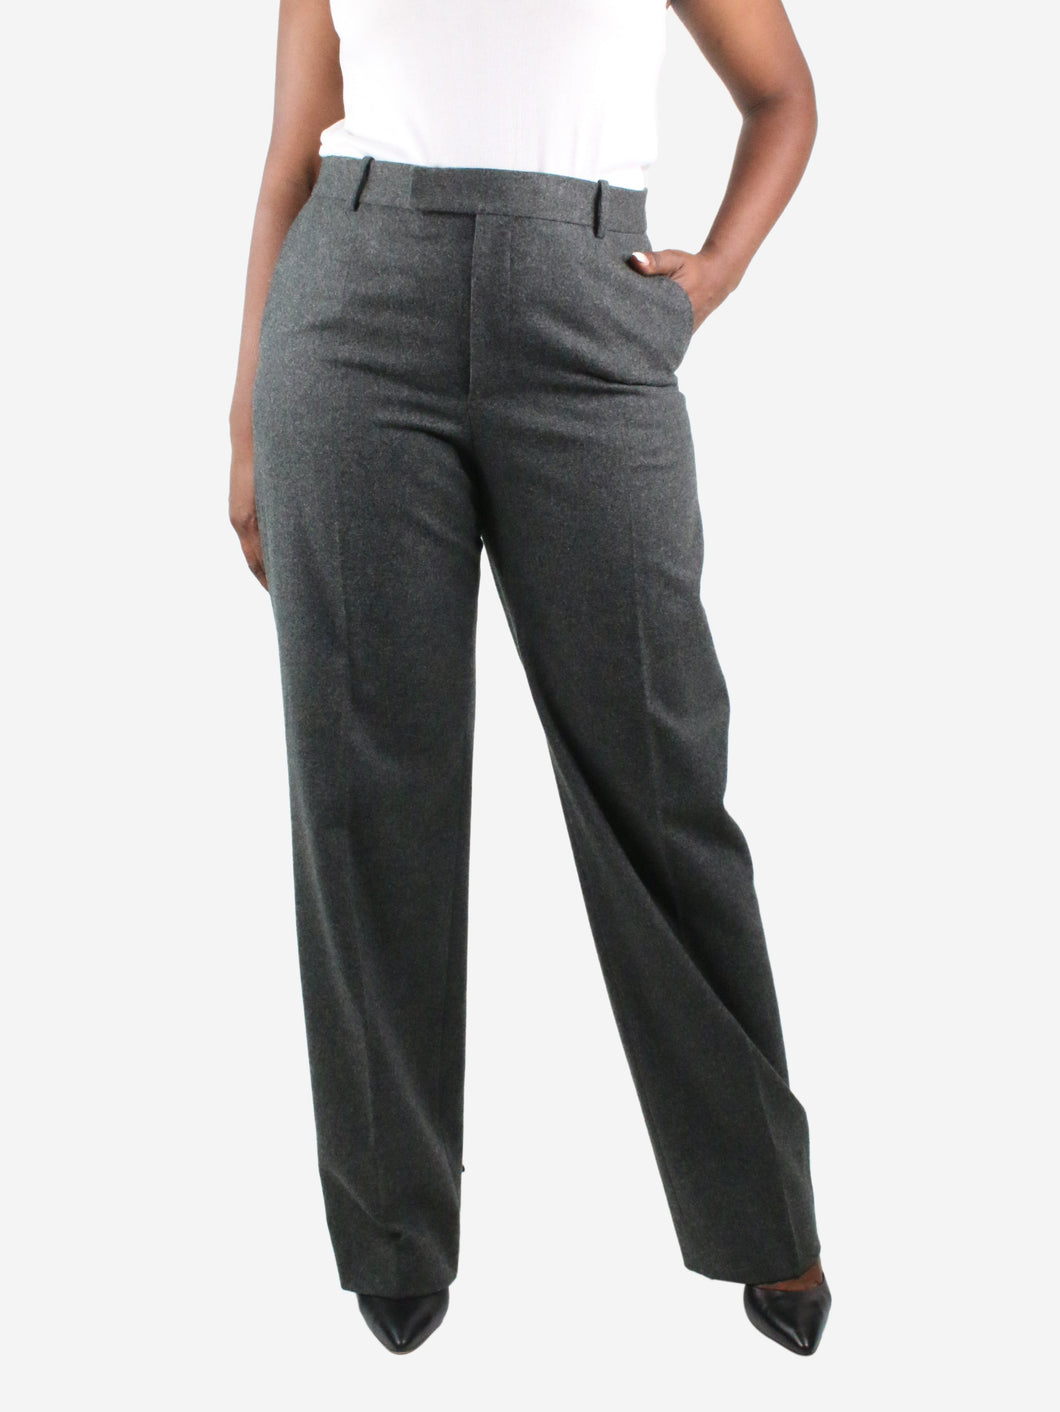 Grey high-waisted straight-leg trousers - size 14 Trousers Celine 